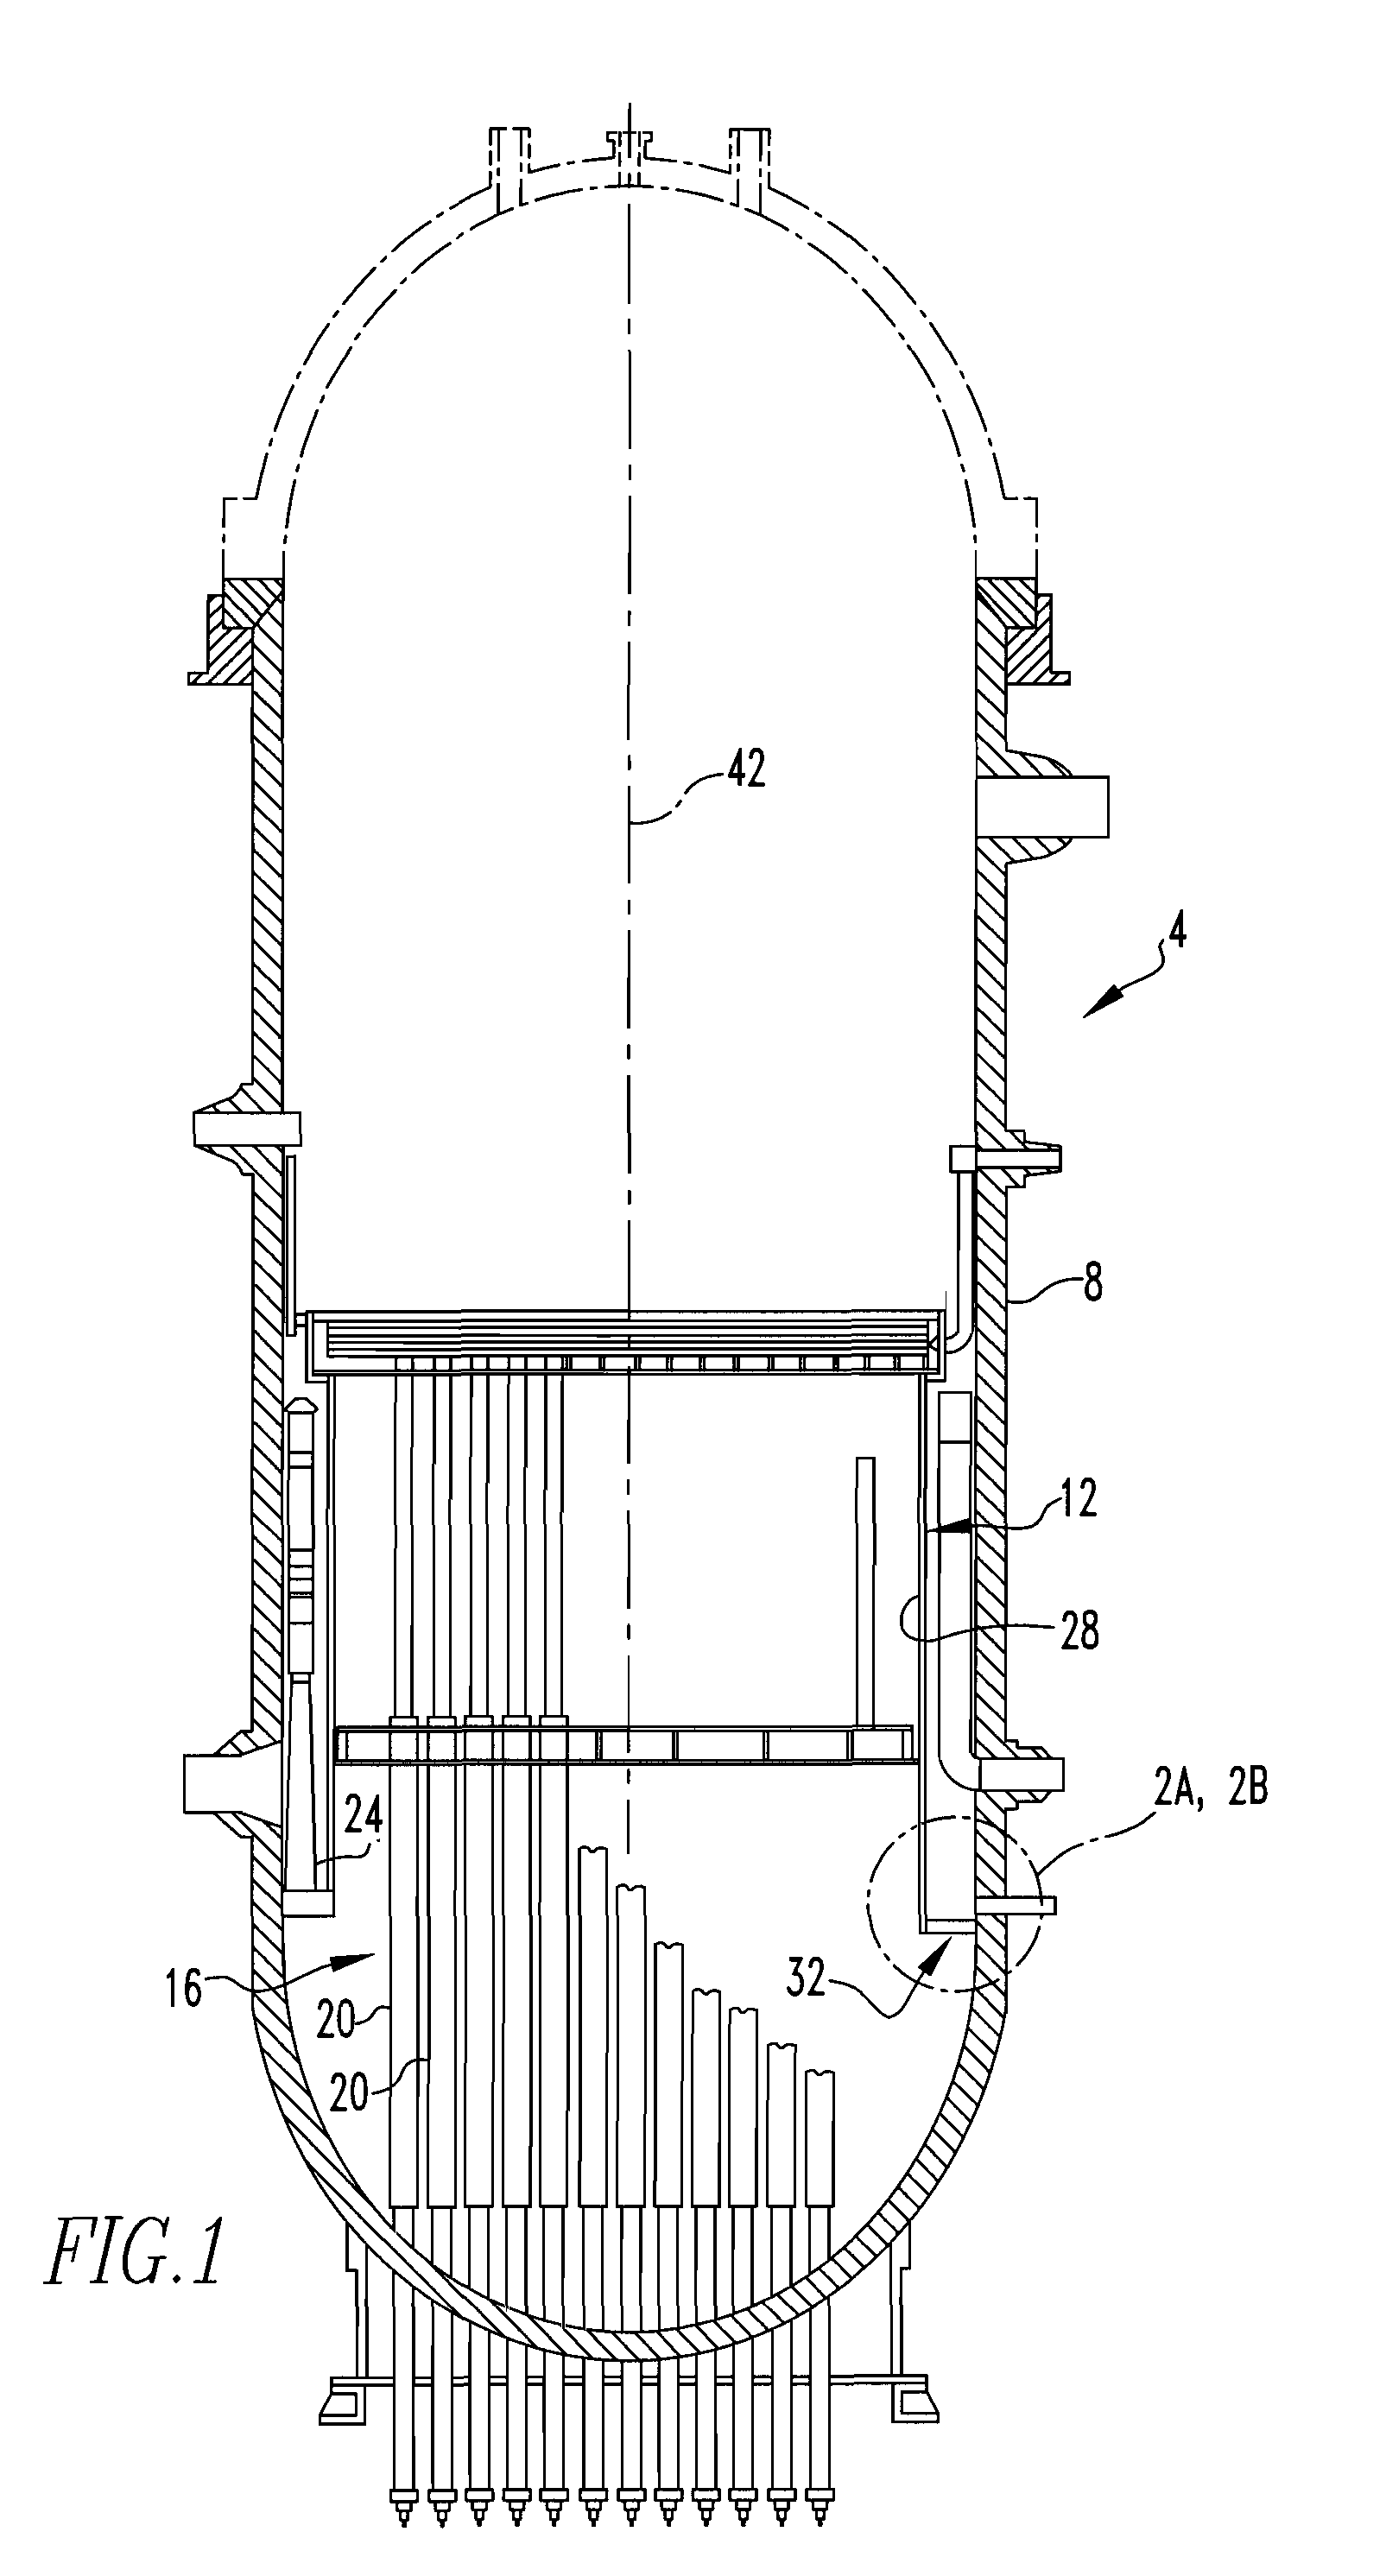 Method of Replacing Shroud of Boiling Water Nuclear Reactor, and Associated Apparatus